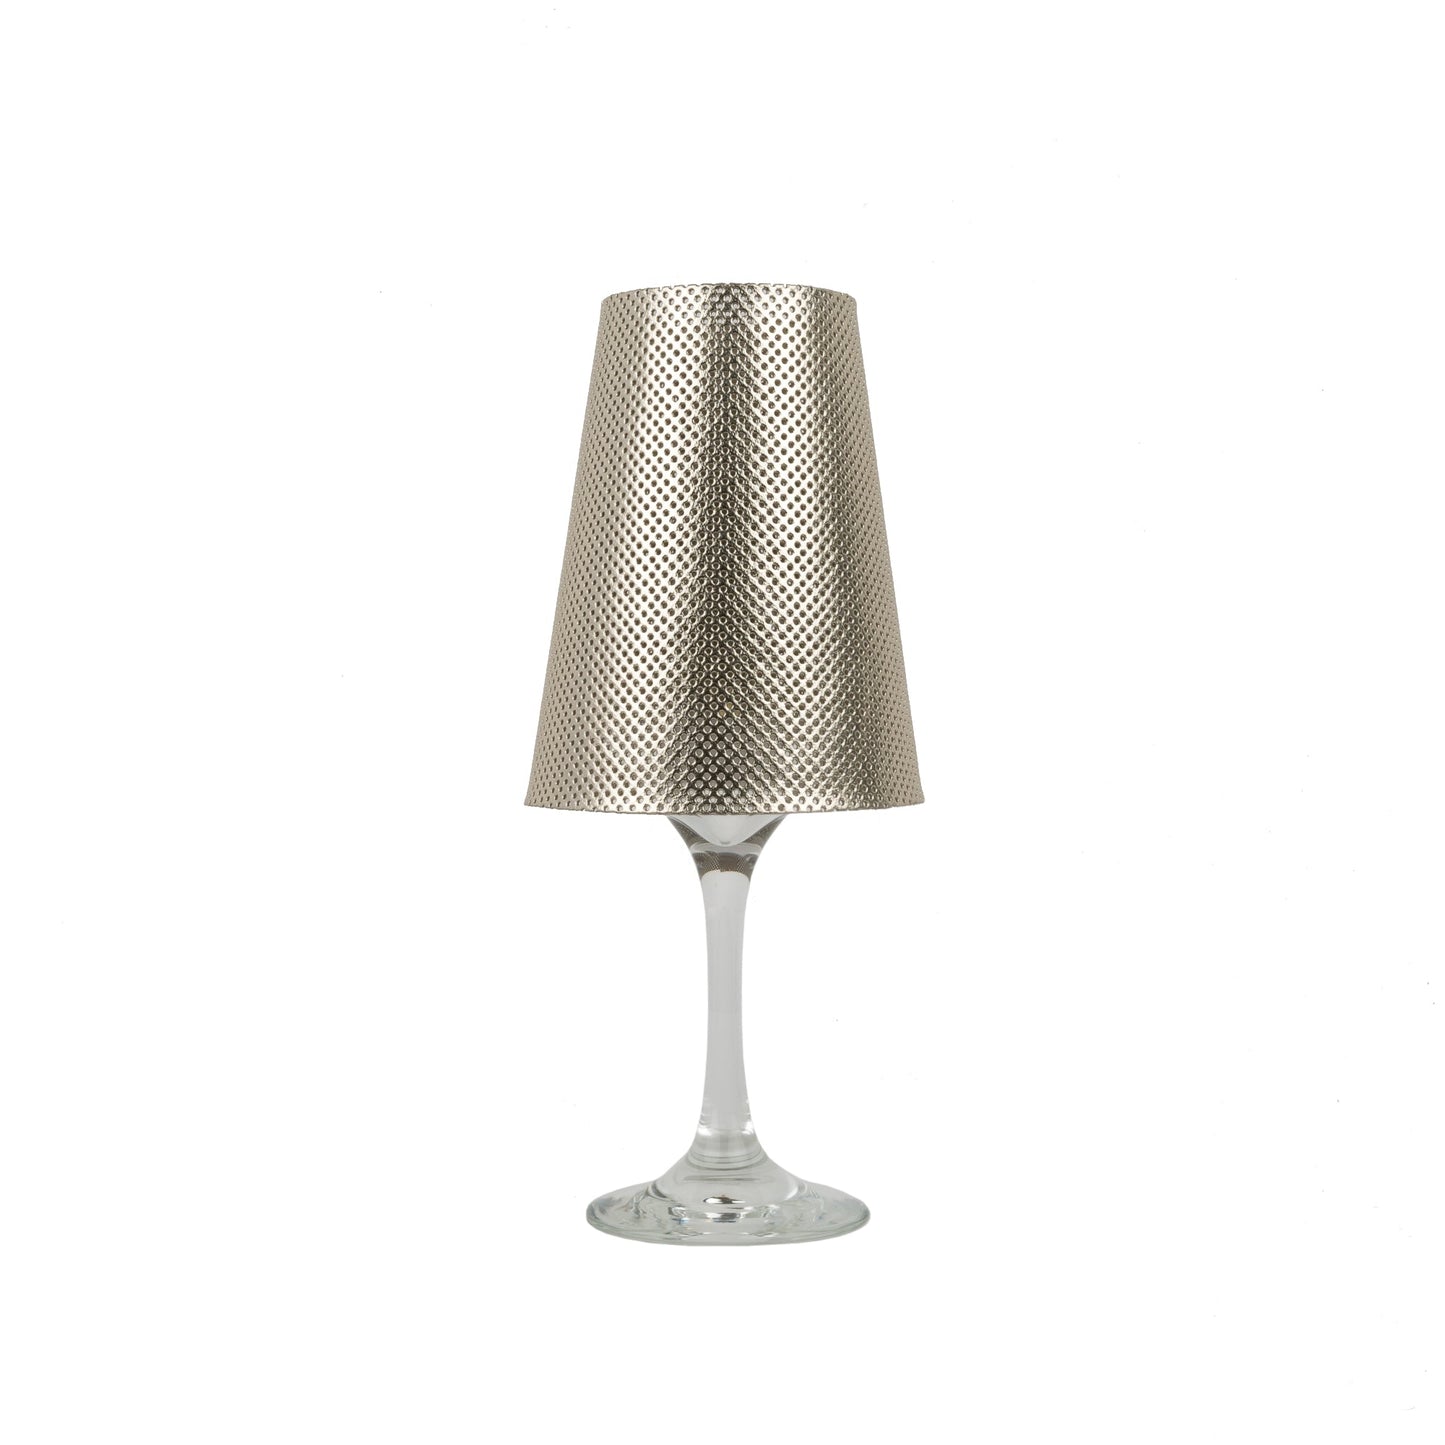 A gold metallic perforated washable paper lampshade is shown sitting atop a wine glass.